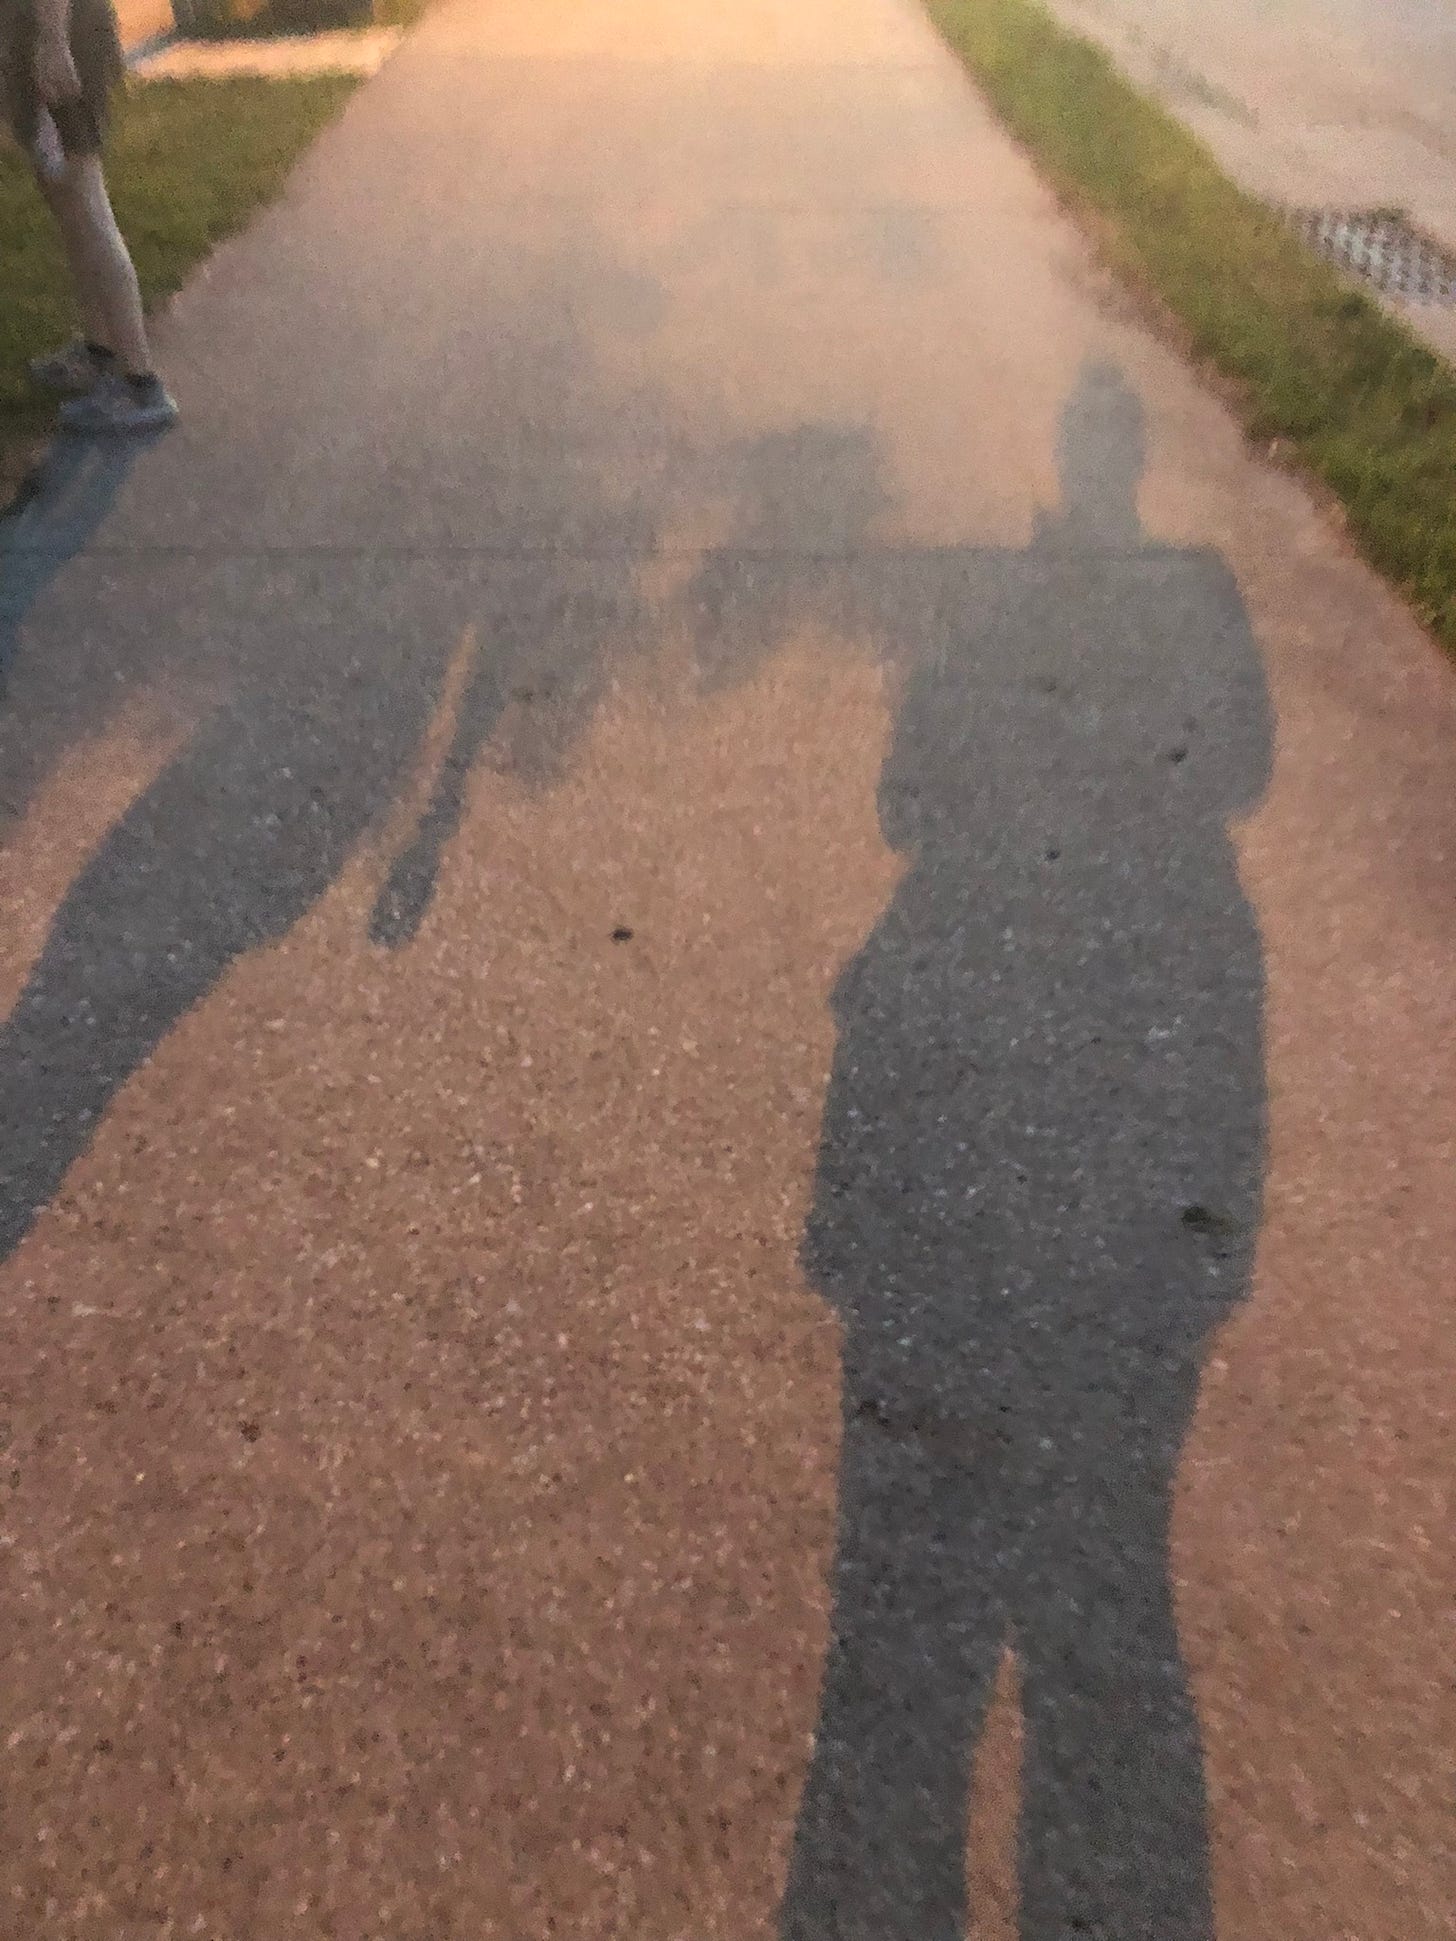 the shadows of two people cast onto a twilight sidewalk, blurred as in motion